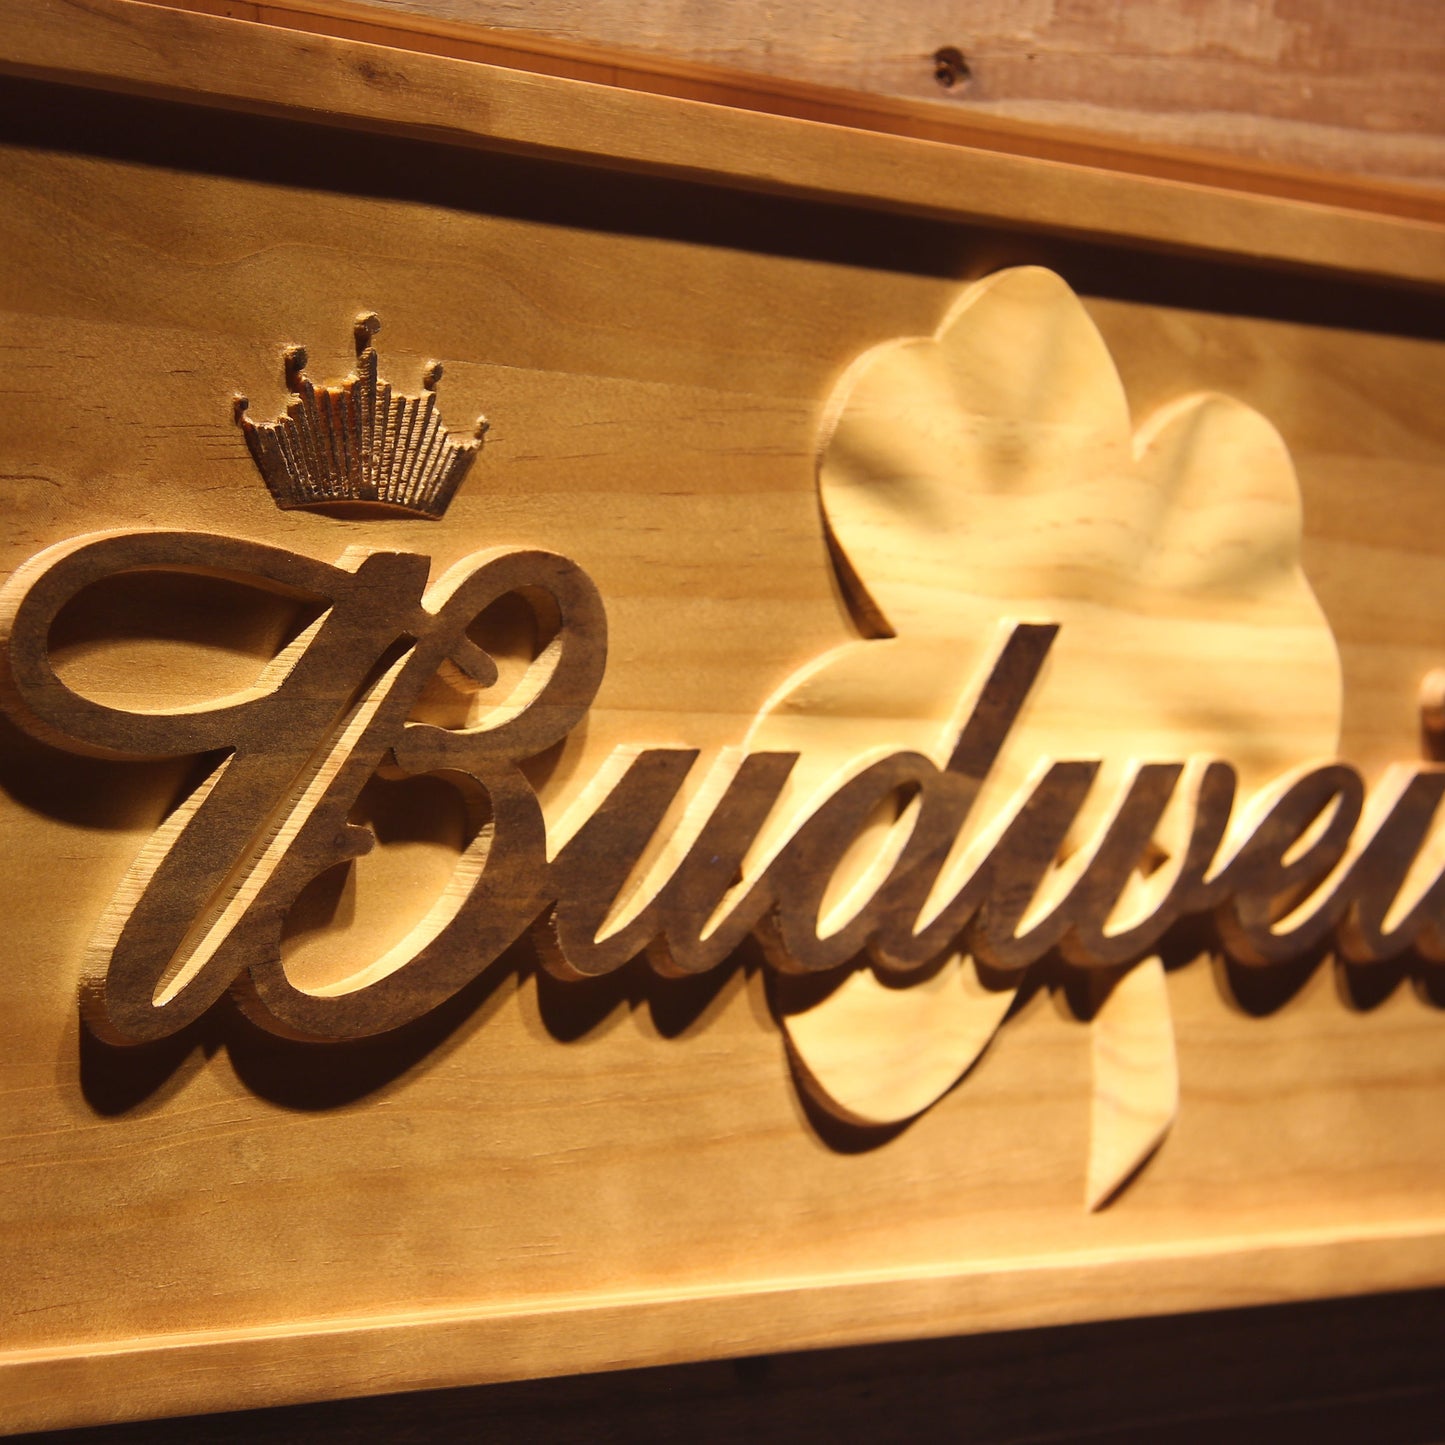 Budwesier Shamrock  3D Wooden Bar Signs by Woody Signs Co. - Handmade Crafted Unique Wooden Creative